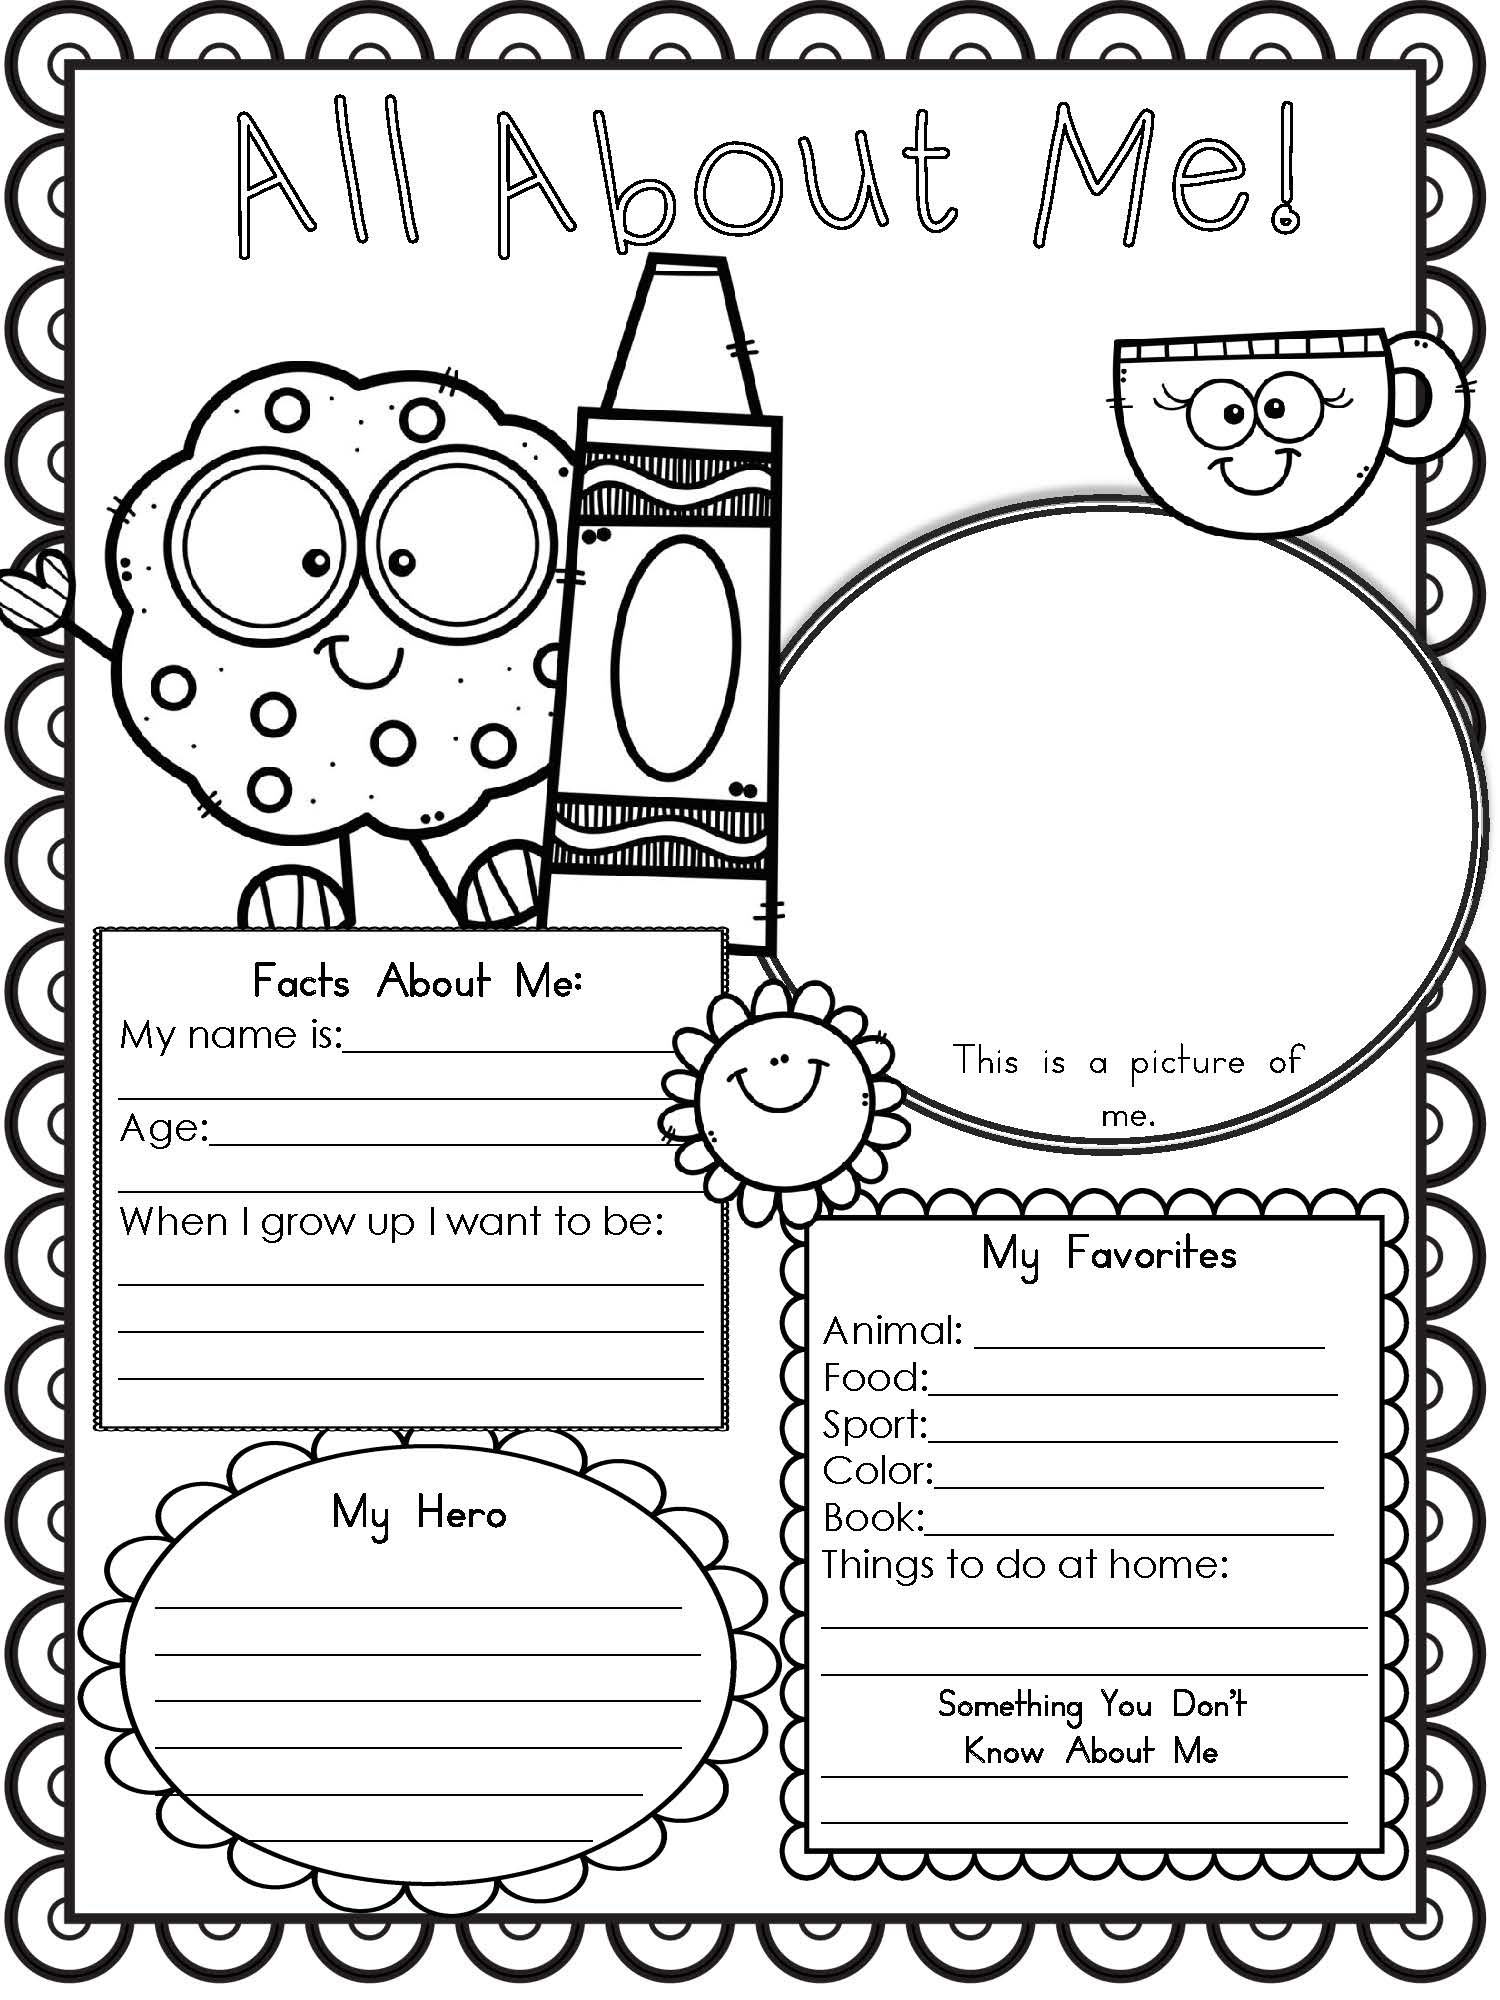 Free Printable All About Me Worksheet For Middle School